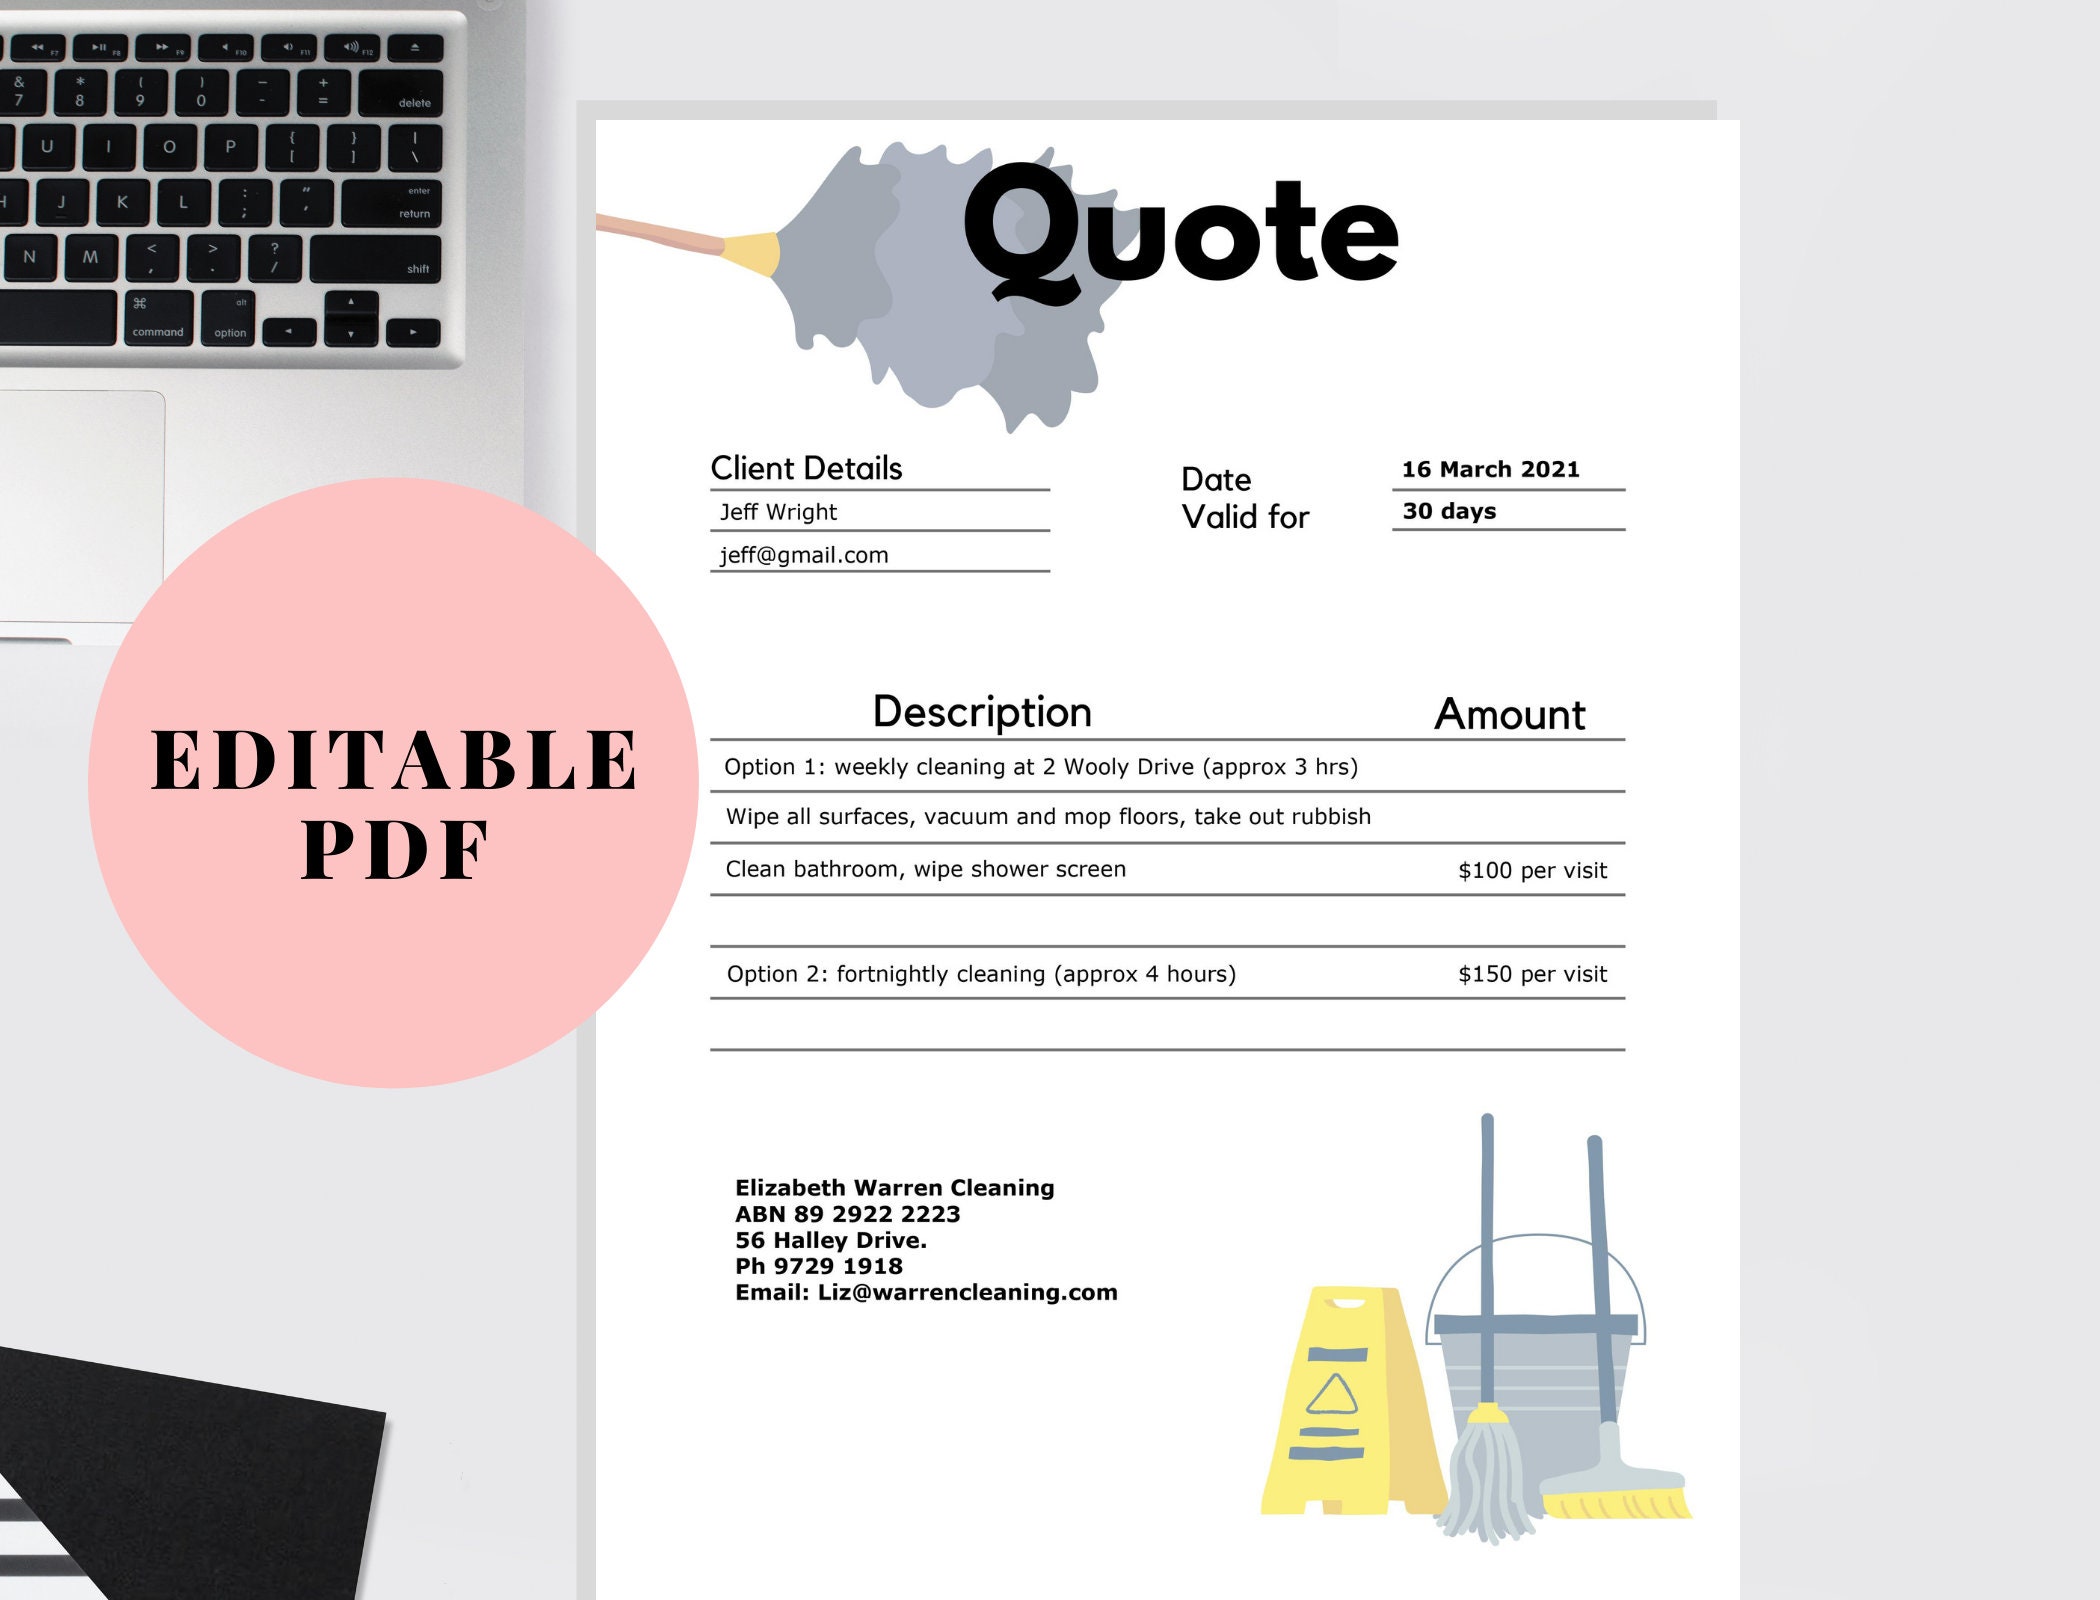 Cleaning Quote, Cleaning Business Quote Form Template, Cleaning Service